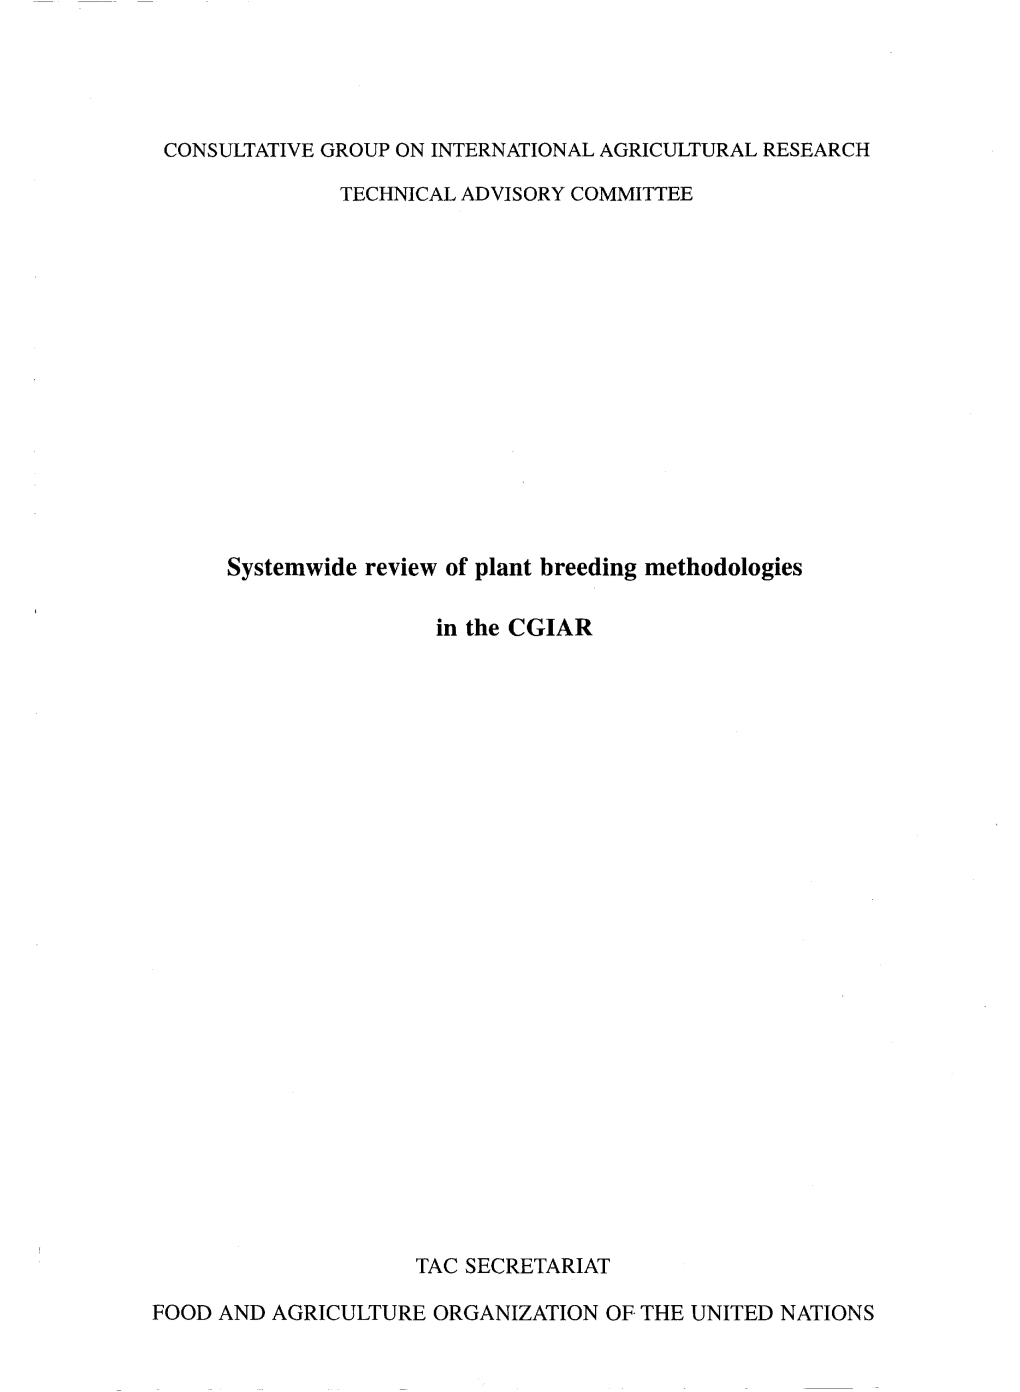 Systemwide Review of Plant Breeding Methodologies